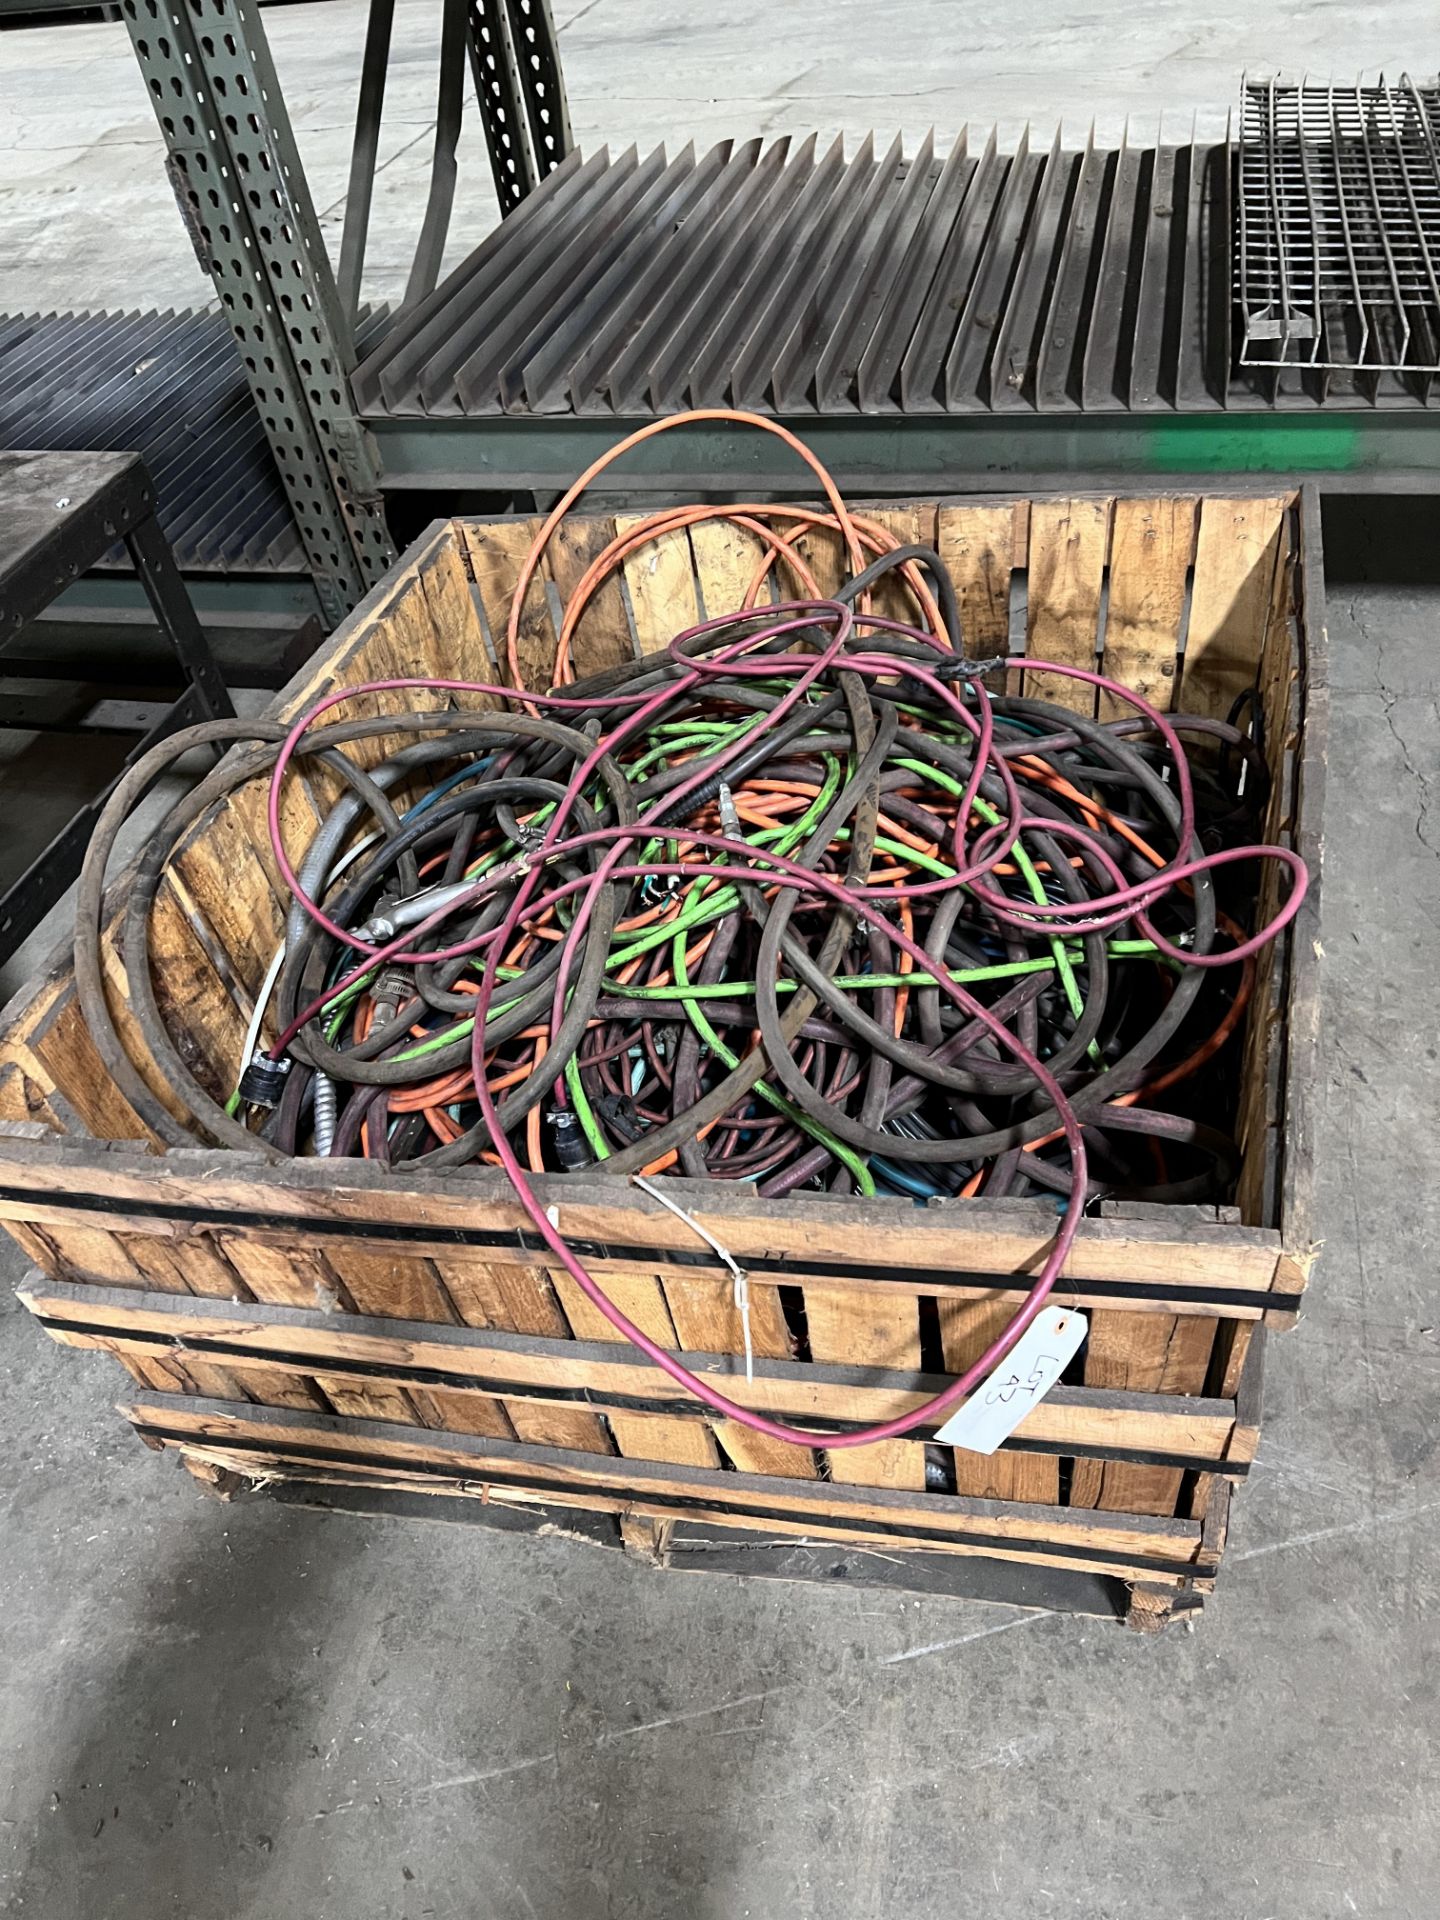 Basket of air hoses and electrical cords